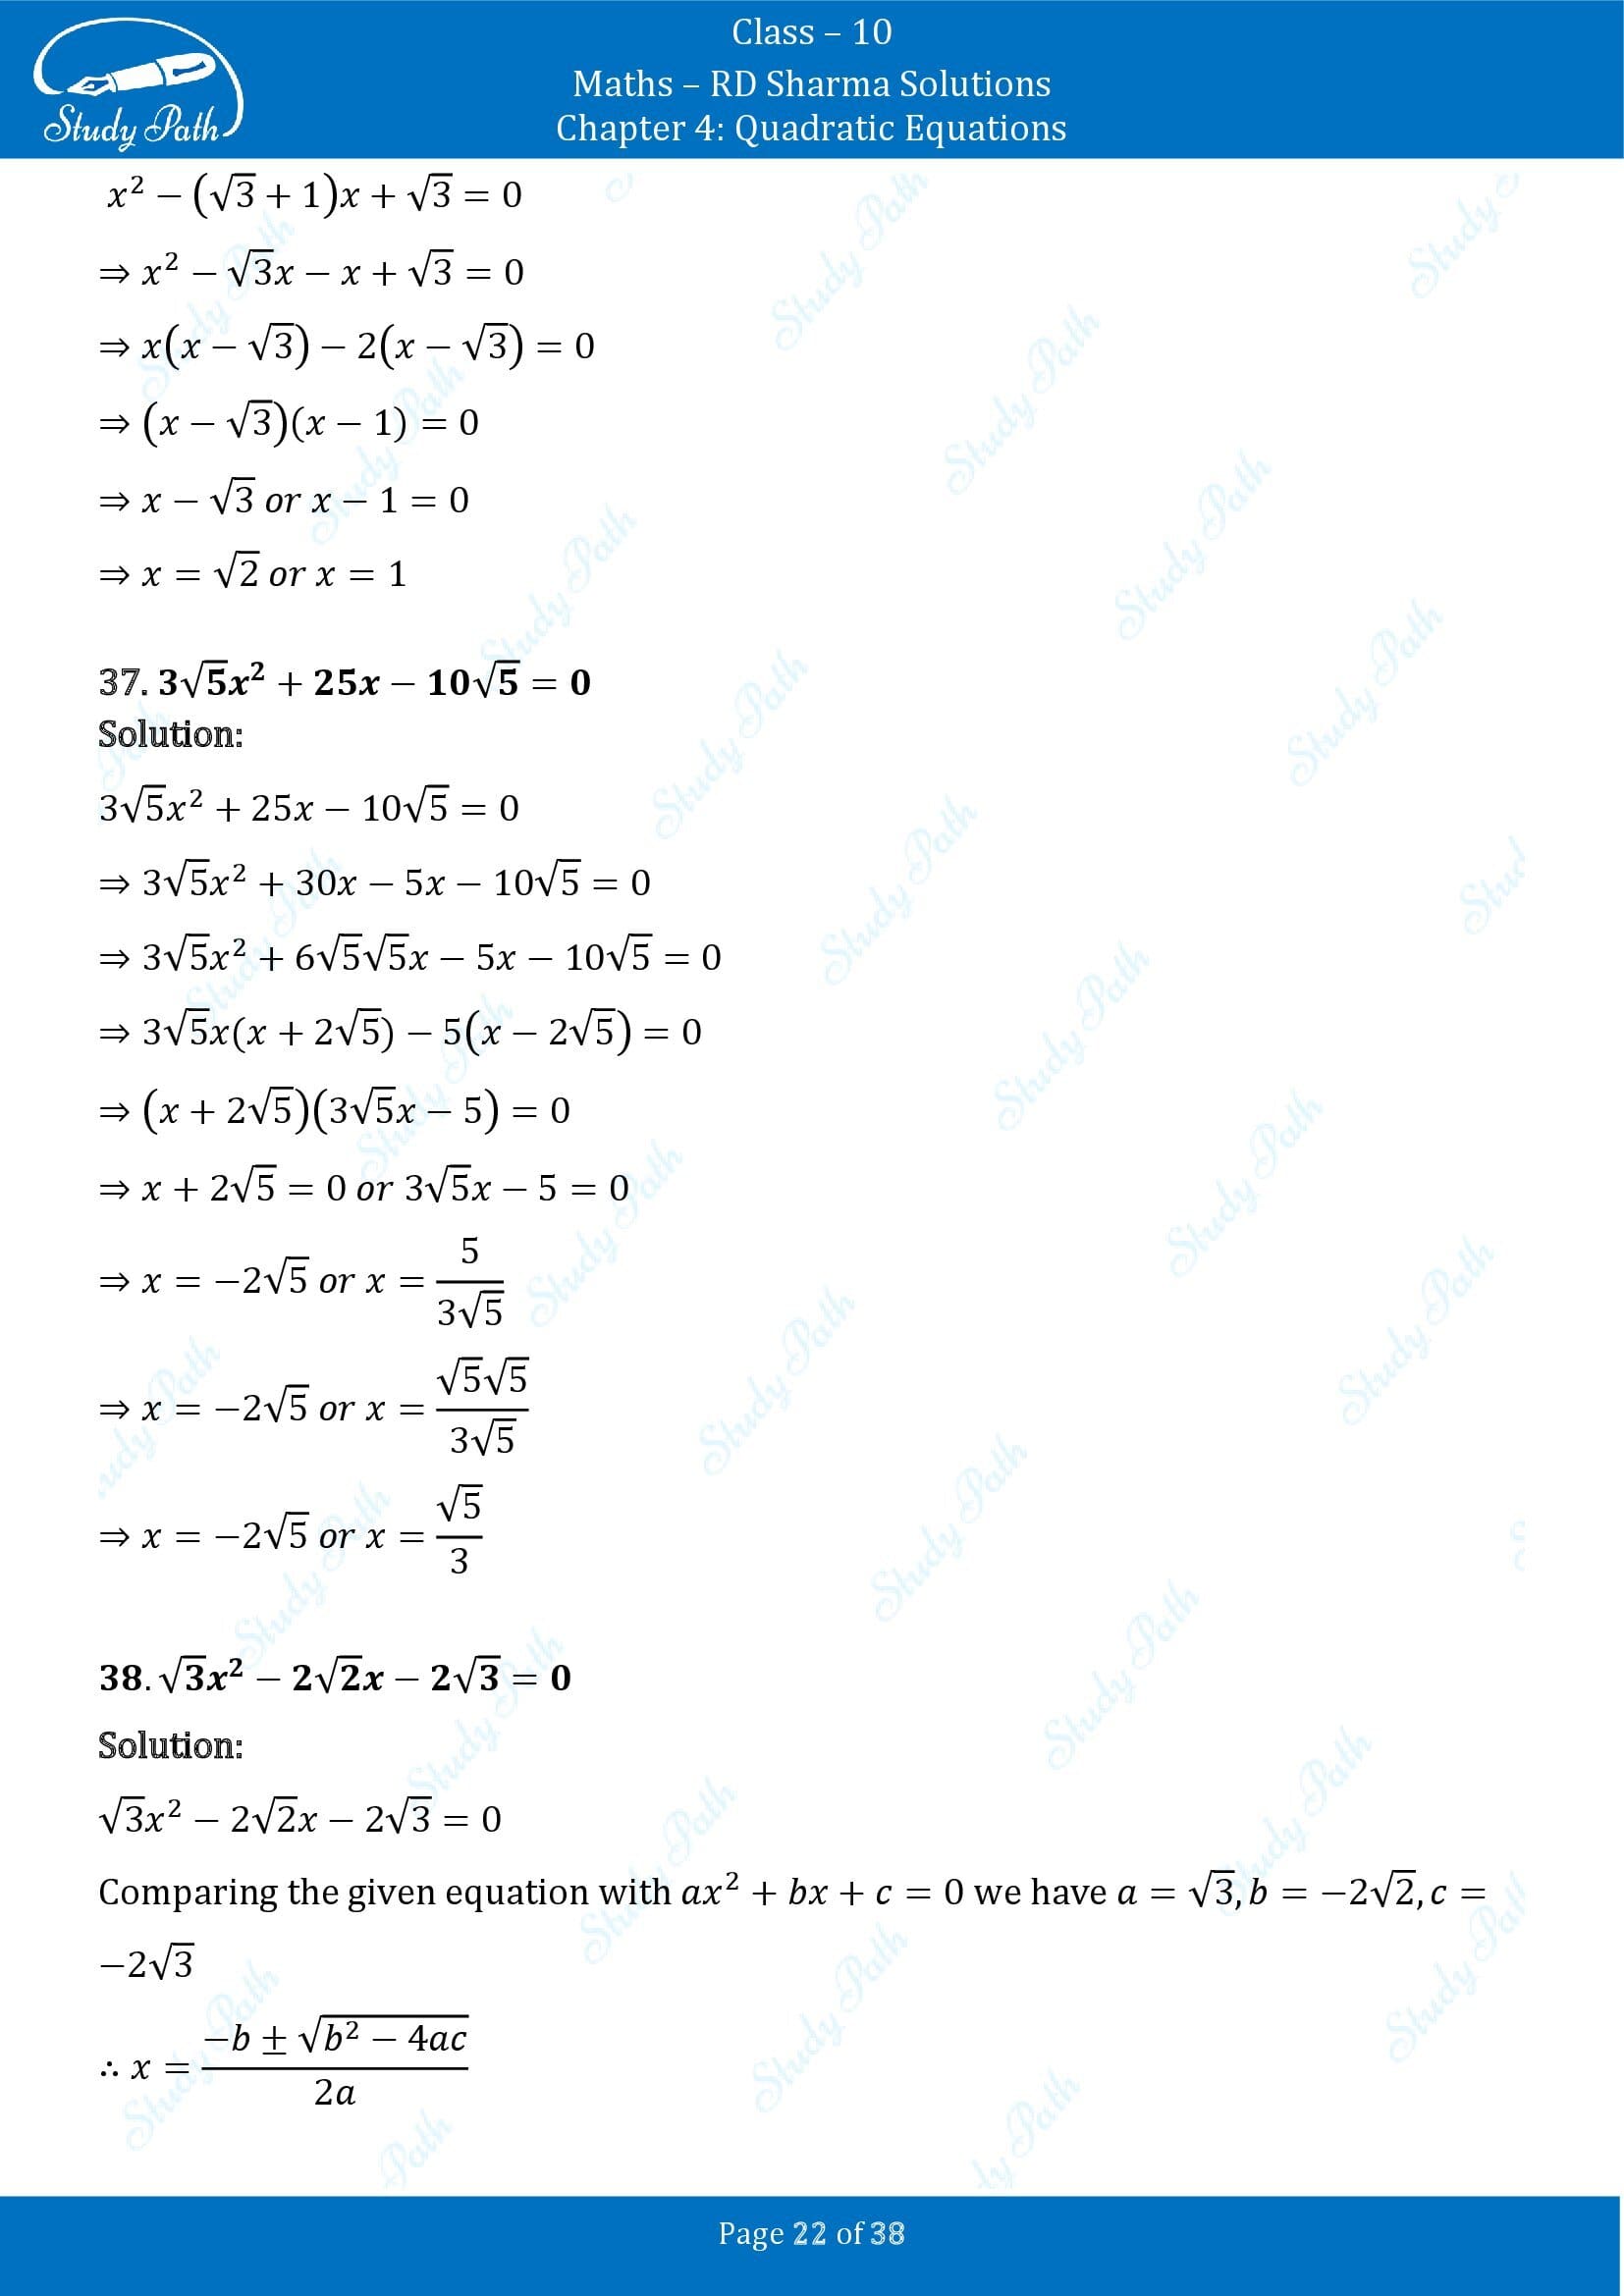 RD Sharma Solutions Class 10 Chapter 4 Quadratic Equations Exercise 4.3 00022